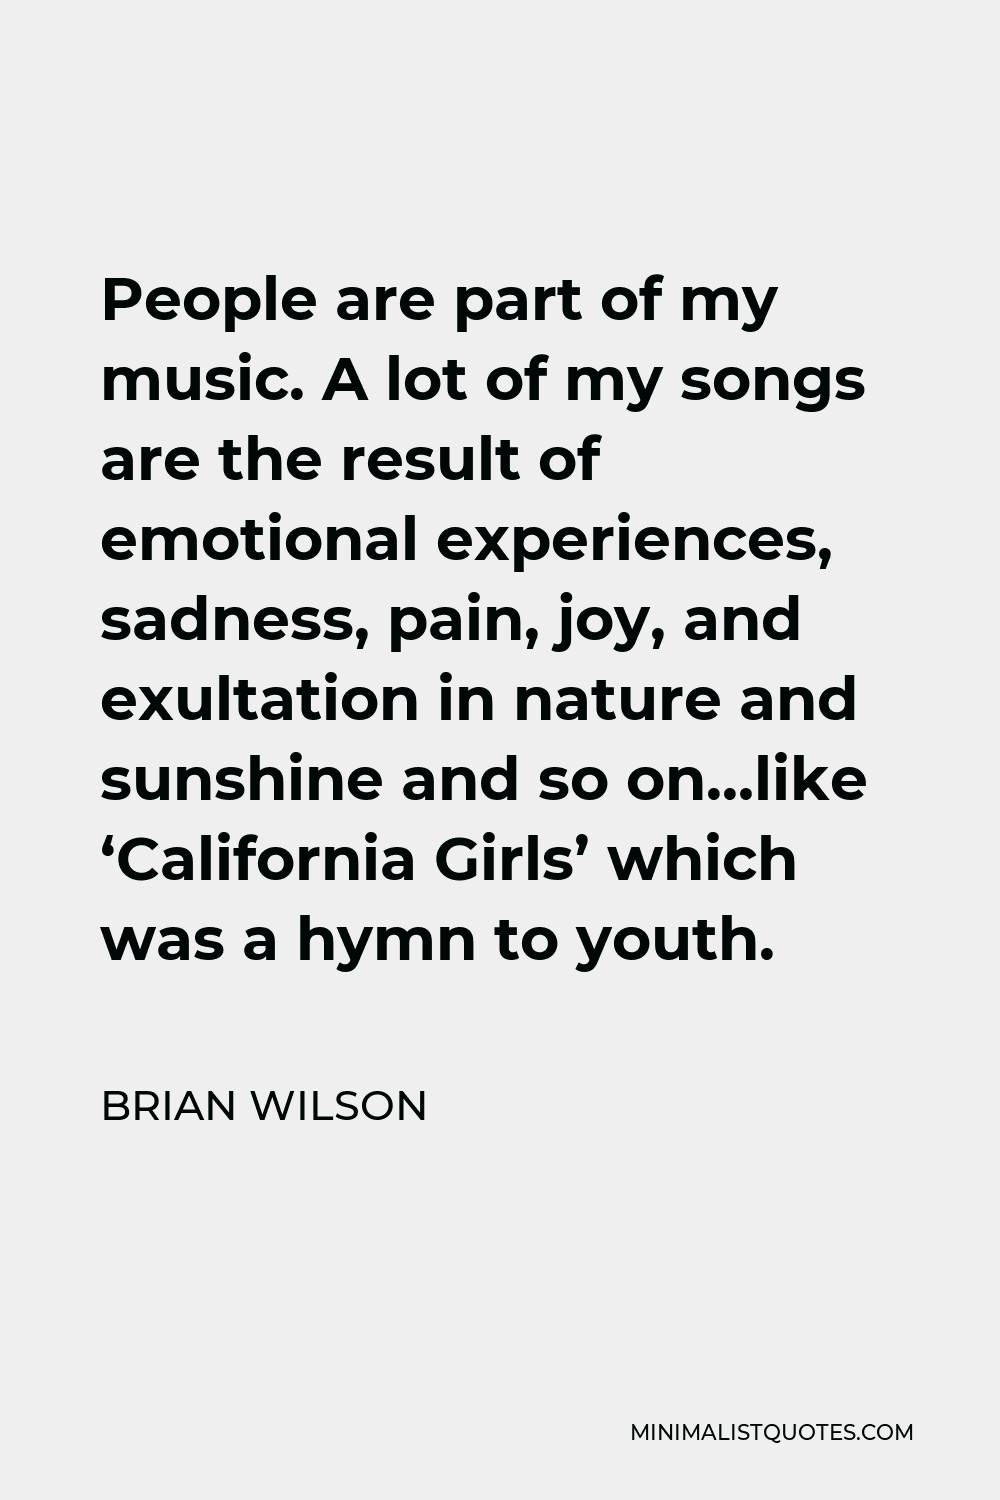 Brian Wilson Quote - People are part of my music. A lot of my songs are the result of emotional experiences, sadness, pain, joy, and exultation in nature and sunshine and so on…like ‘California Girls’ which was a hymn to youth.